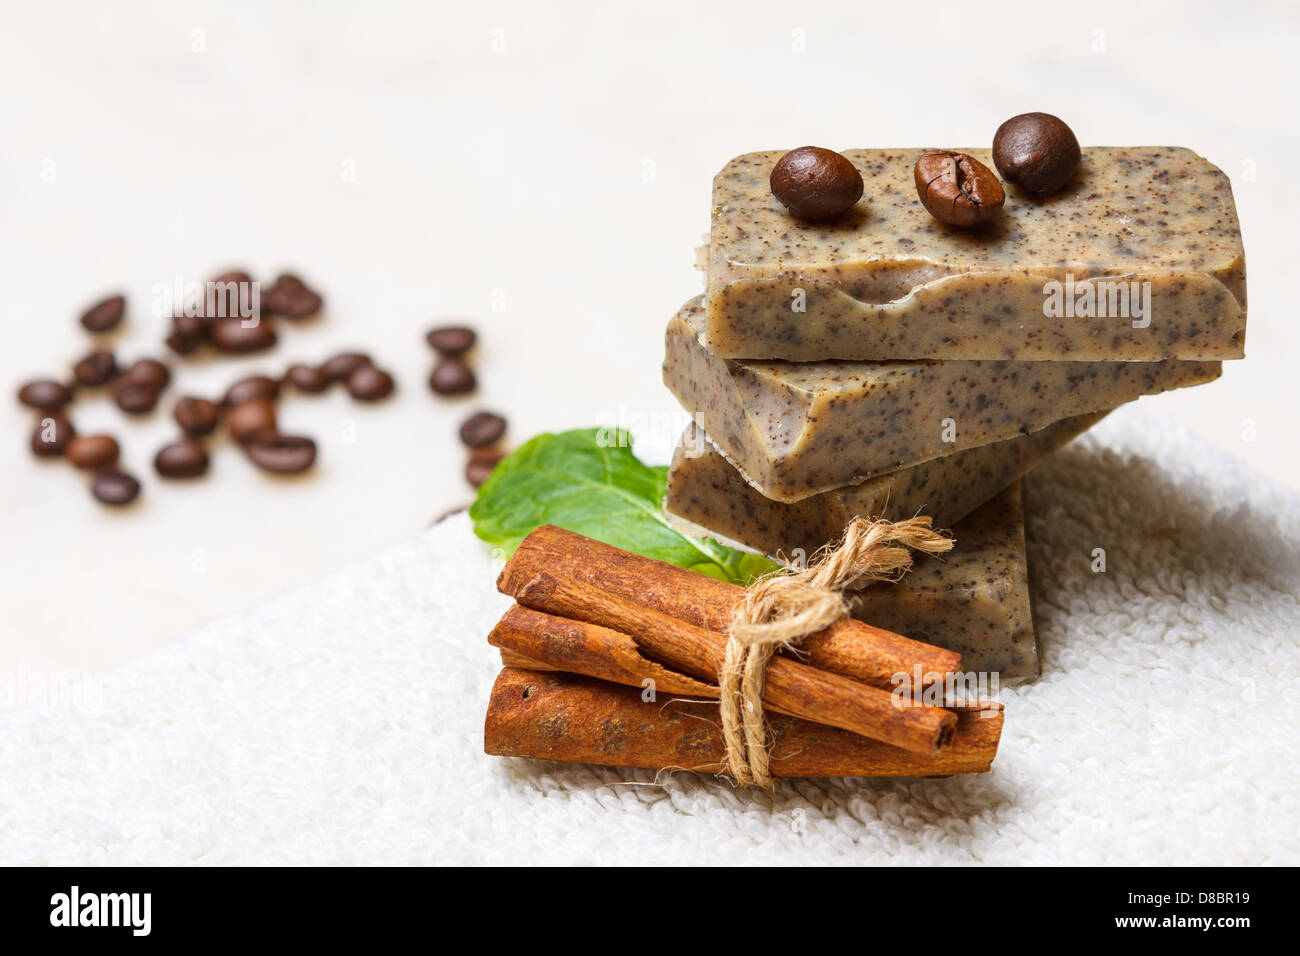 Stack of handmade flavored soap bars with coffee beans, cinnamon and lavender leaf on white towel. Stock Photo